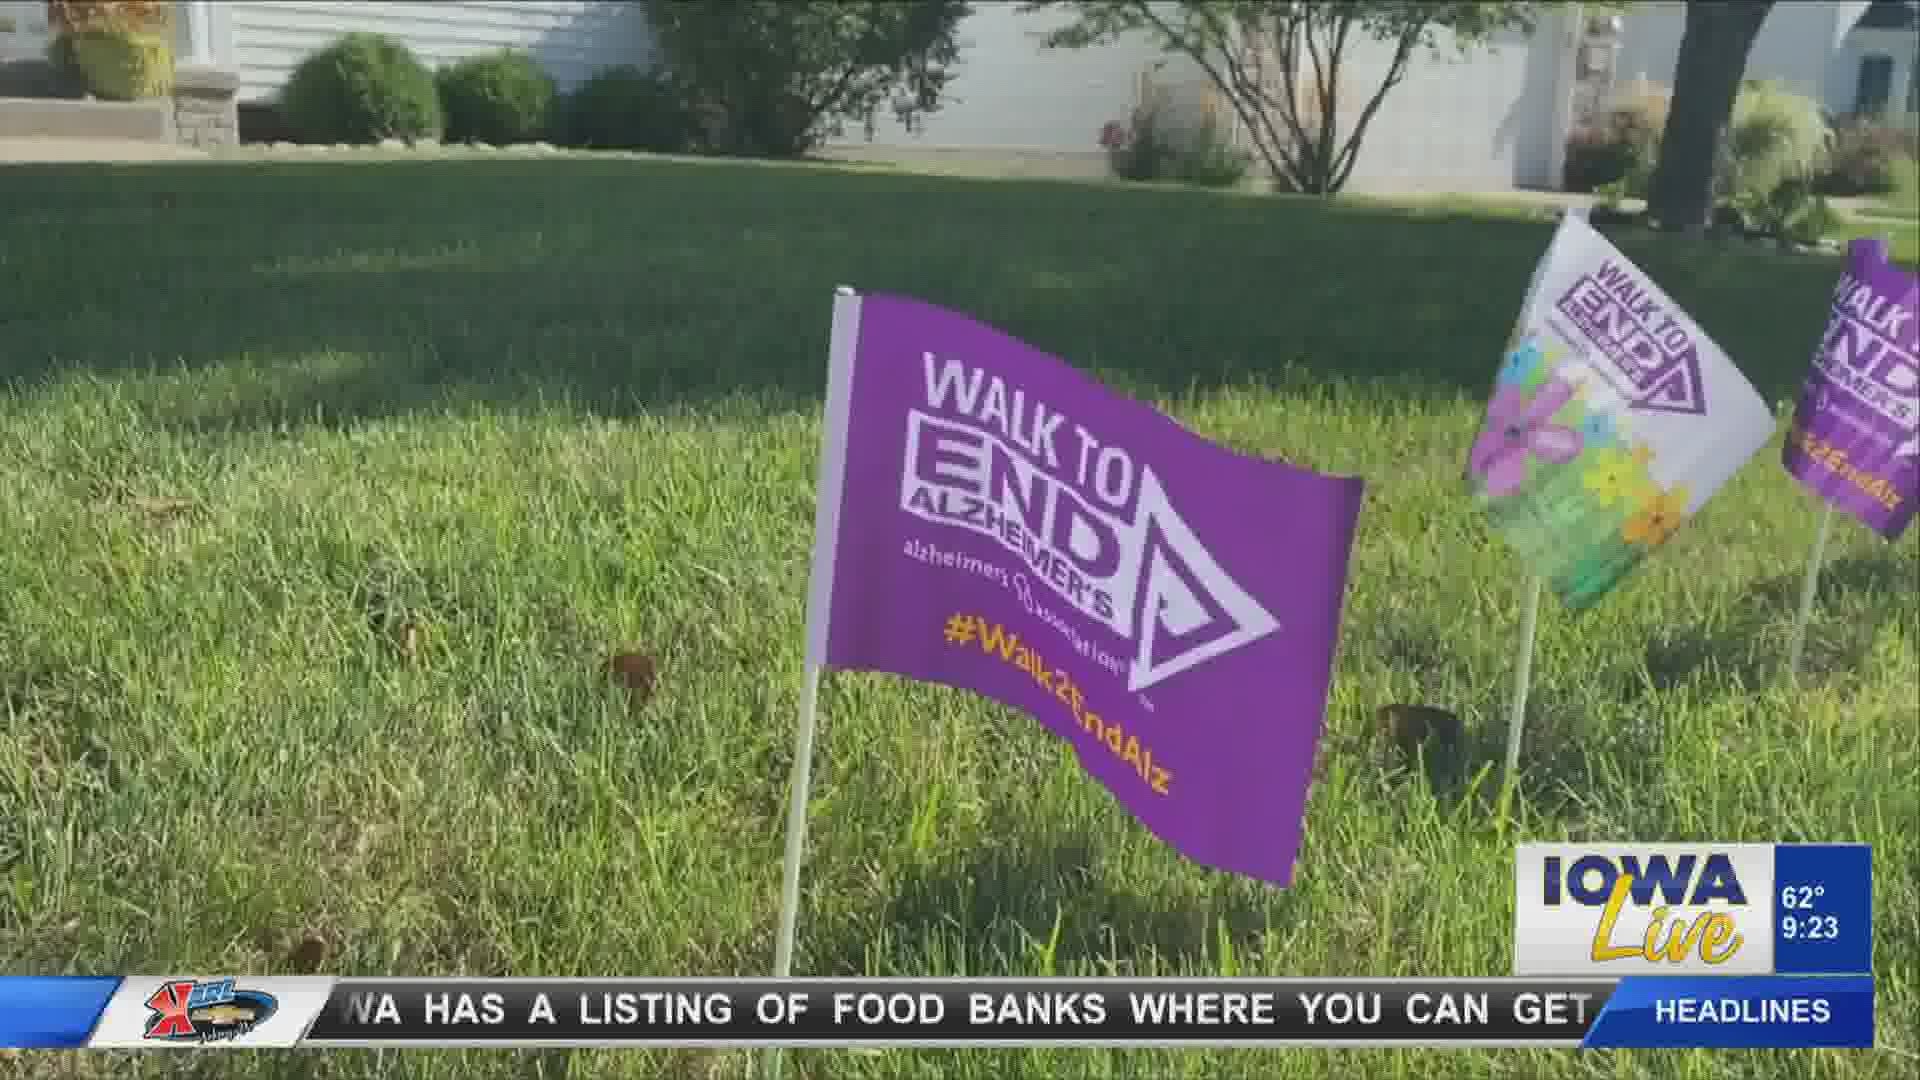 Check out how to participate in the Walk to End Alzheimer's in Ames